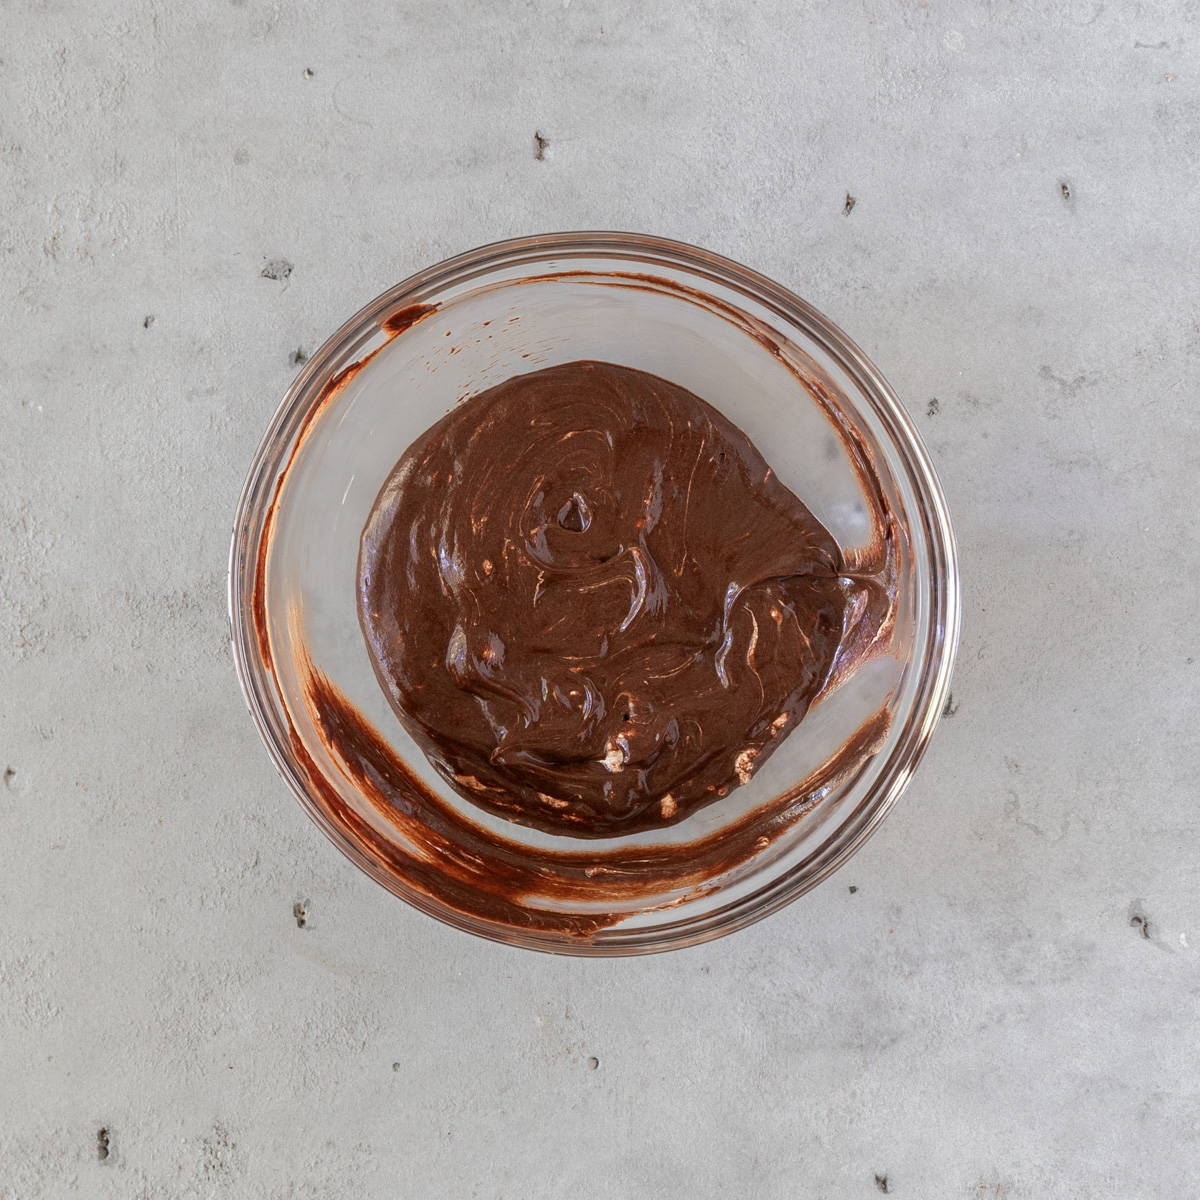 the chocolate and marshmallow ganache in a glass bowl on a grey background.